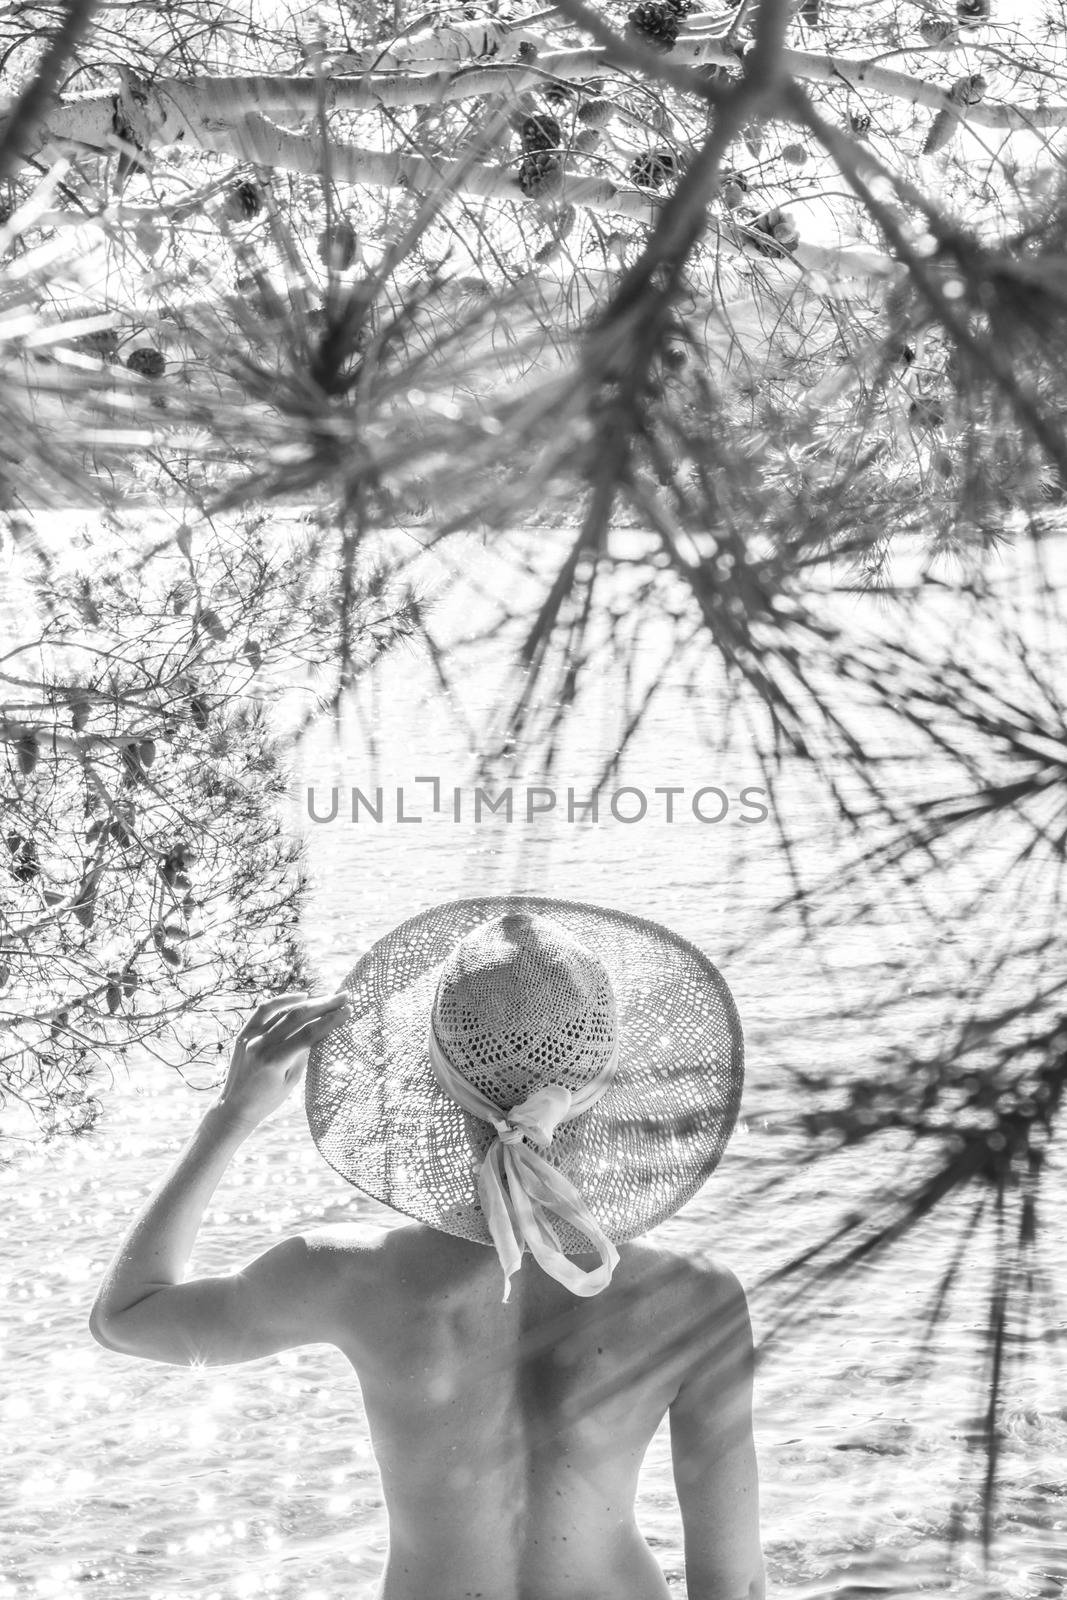 Rear view of topless beautiful woman wearing nothing but straw sun hat realaxing on wild coast of Adriatic sea on beach in shade of pine tree. Relaxed healthy lifestyle concept. Black and white image by kasto